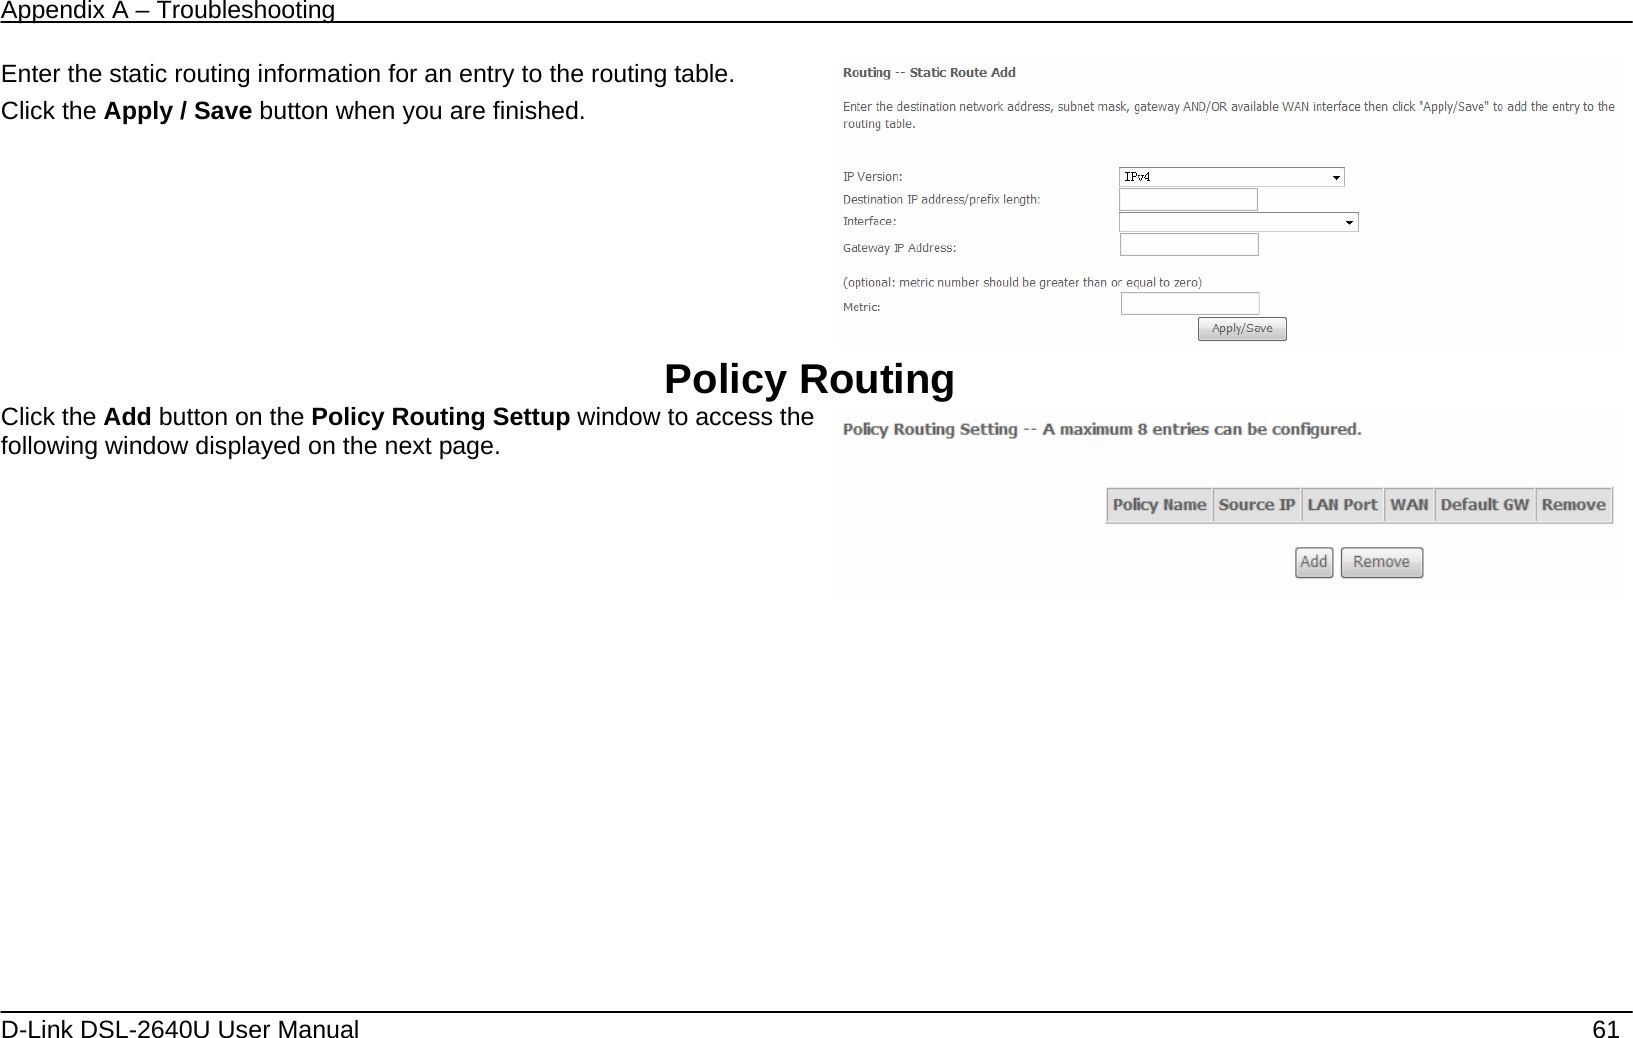 Appendix A – Troubleshooting   D-Link DSL-2640U User Manual    61 Enter the static routing information for an entry to the routing table. Click the Apply / Save button when you are finished.   Policy Routing Click the Add button on the Policy Routing Settup window to access the following window displayed on the next page.    